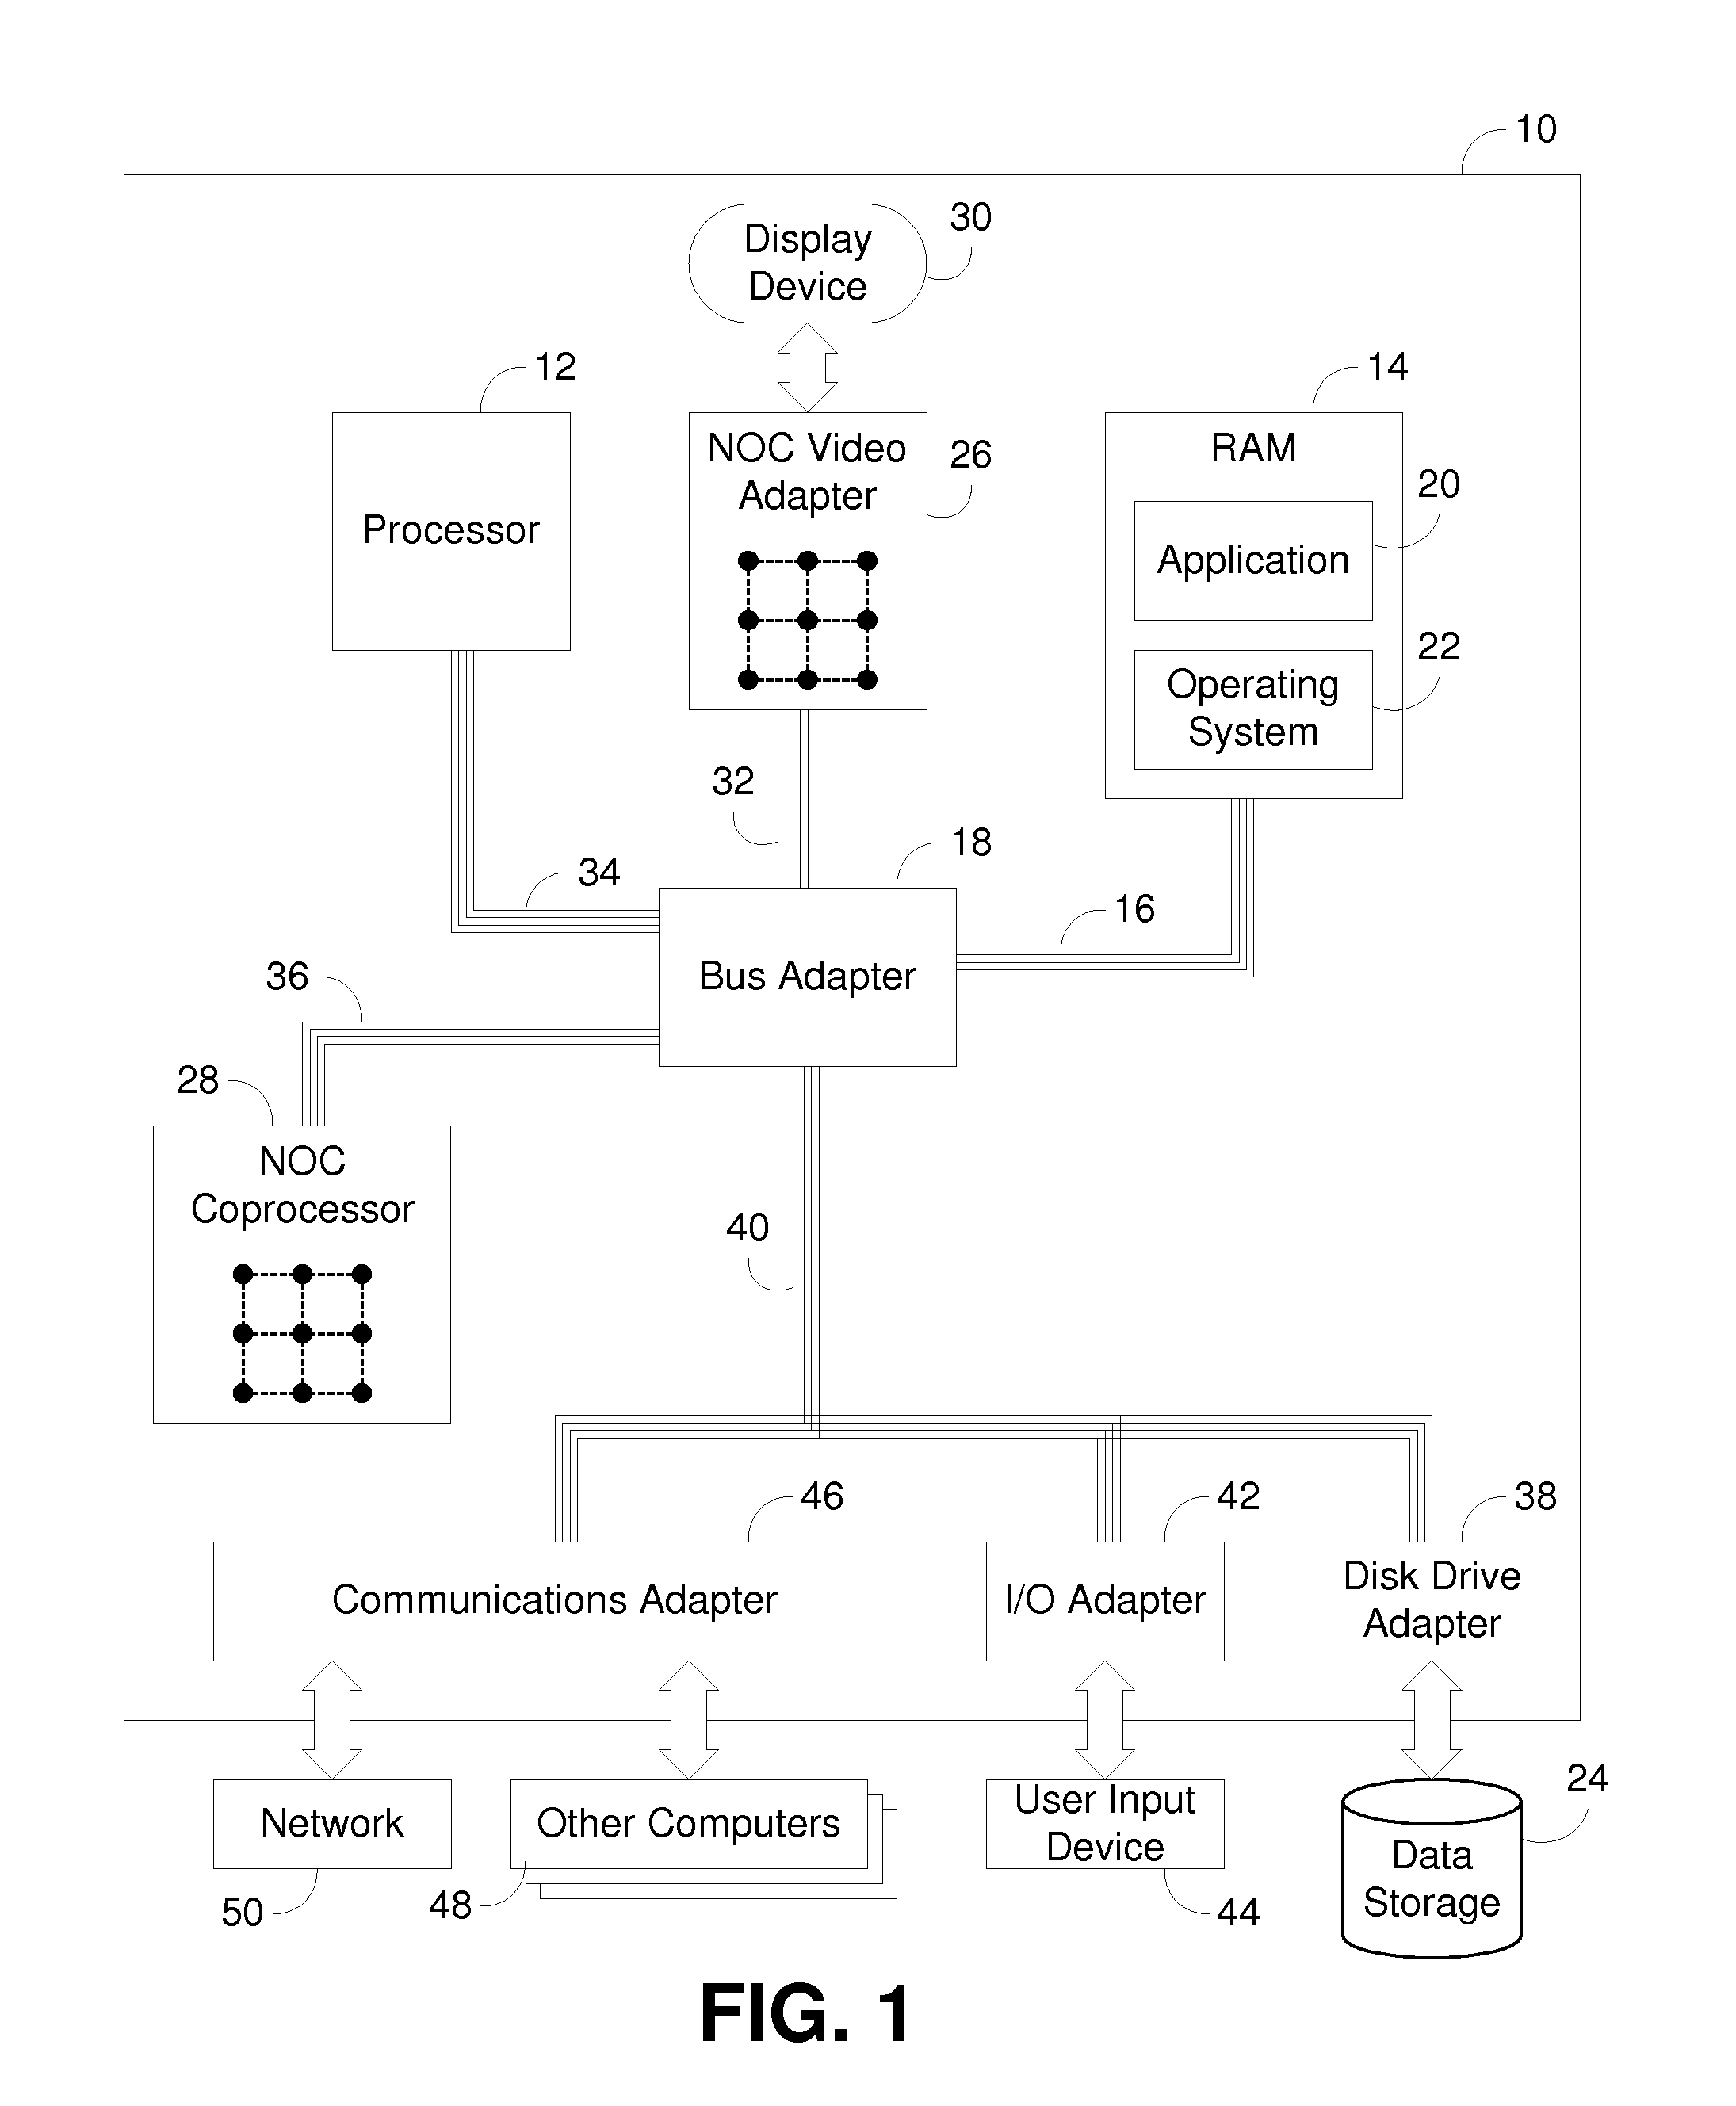 Dynamic Merging of Pipeline Stages in an Execution Pipeline to Reduce Power Consumption